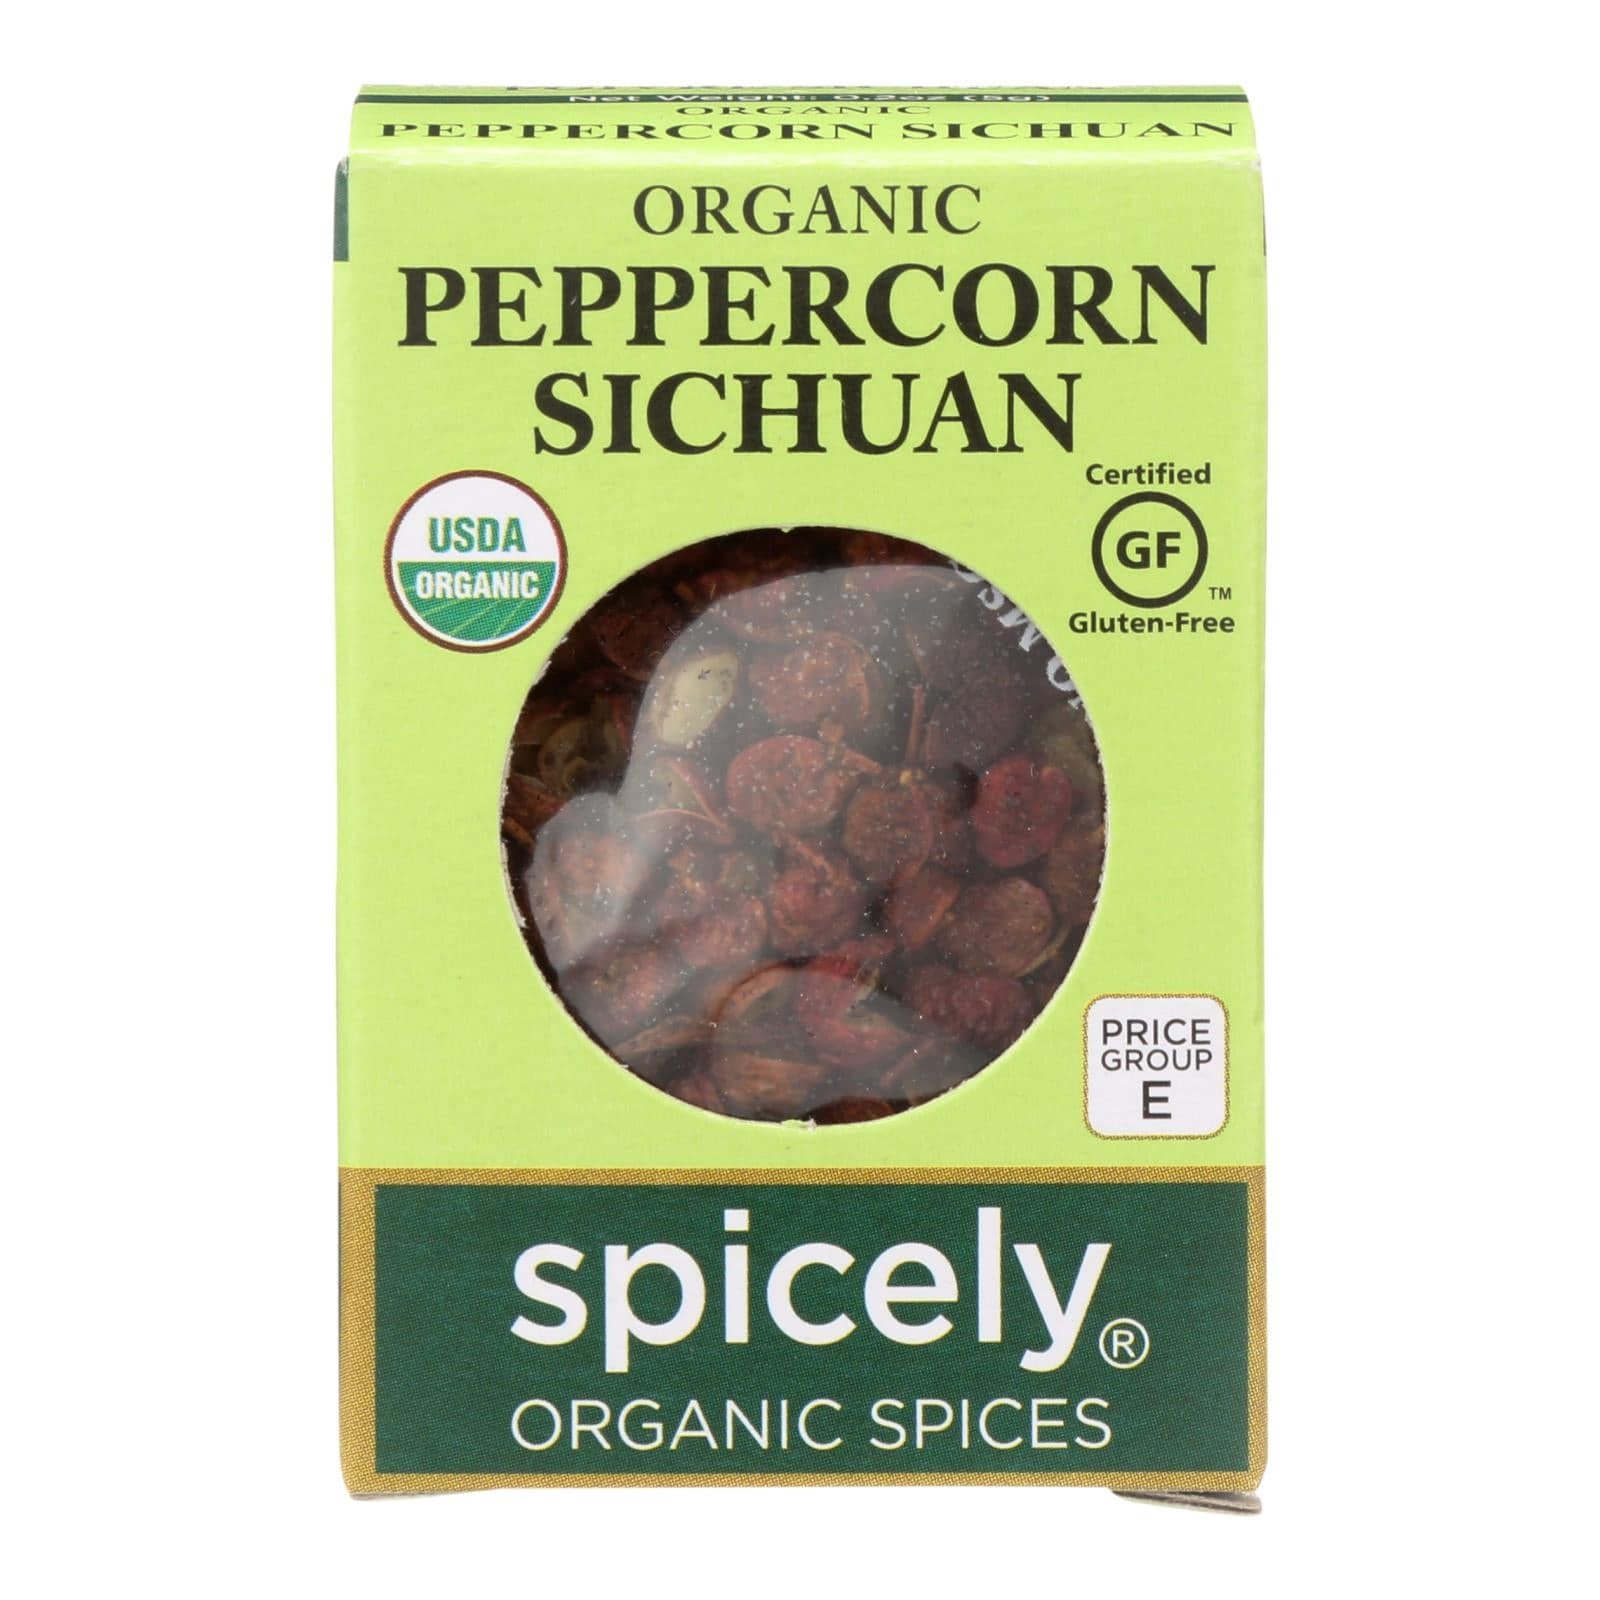 Buy Spicely Organics - Organic Peppercorn - Sichuan - Case Of 6 - 0.2 Oz.  at OnlyNaturals.us